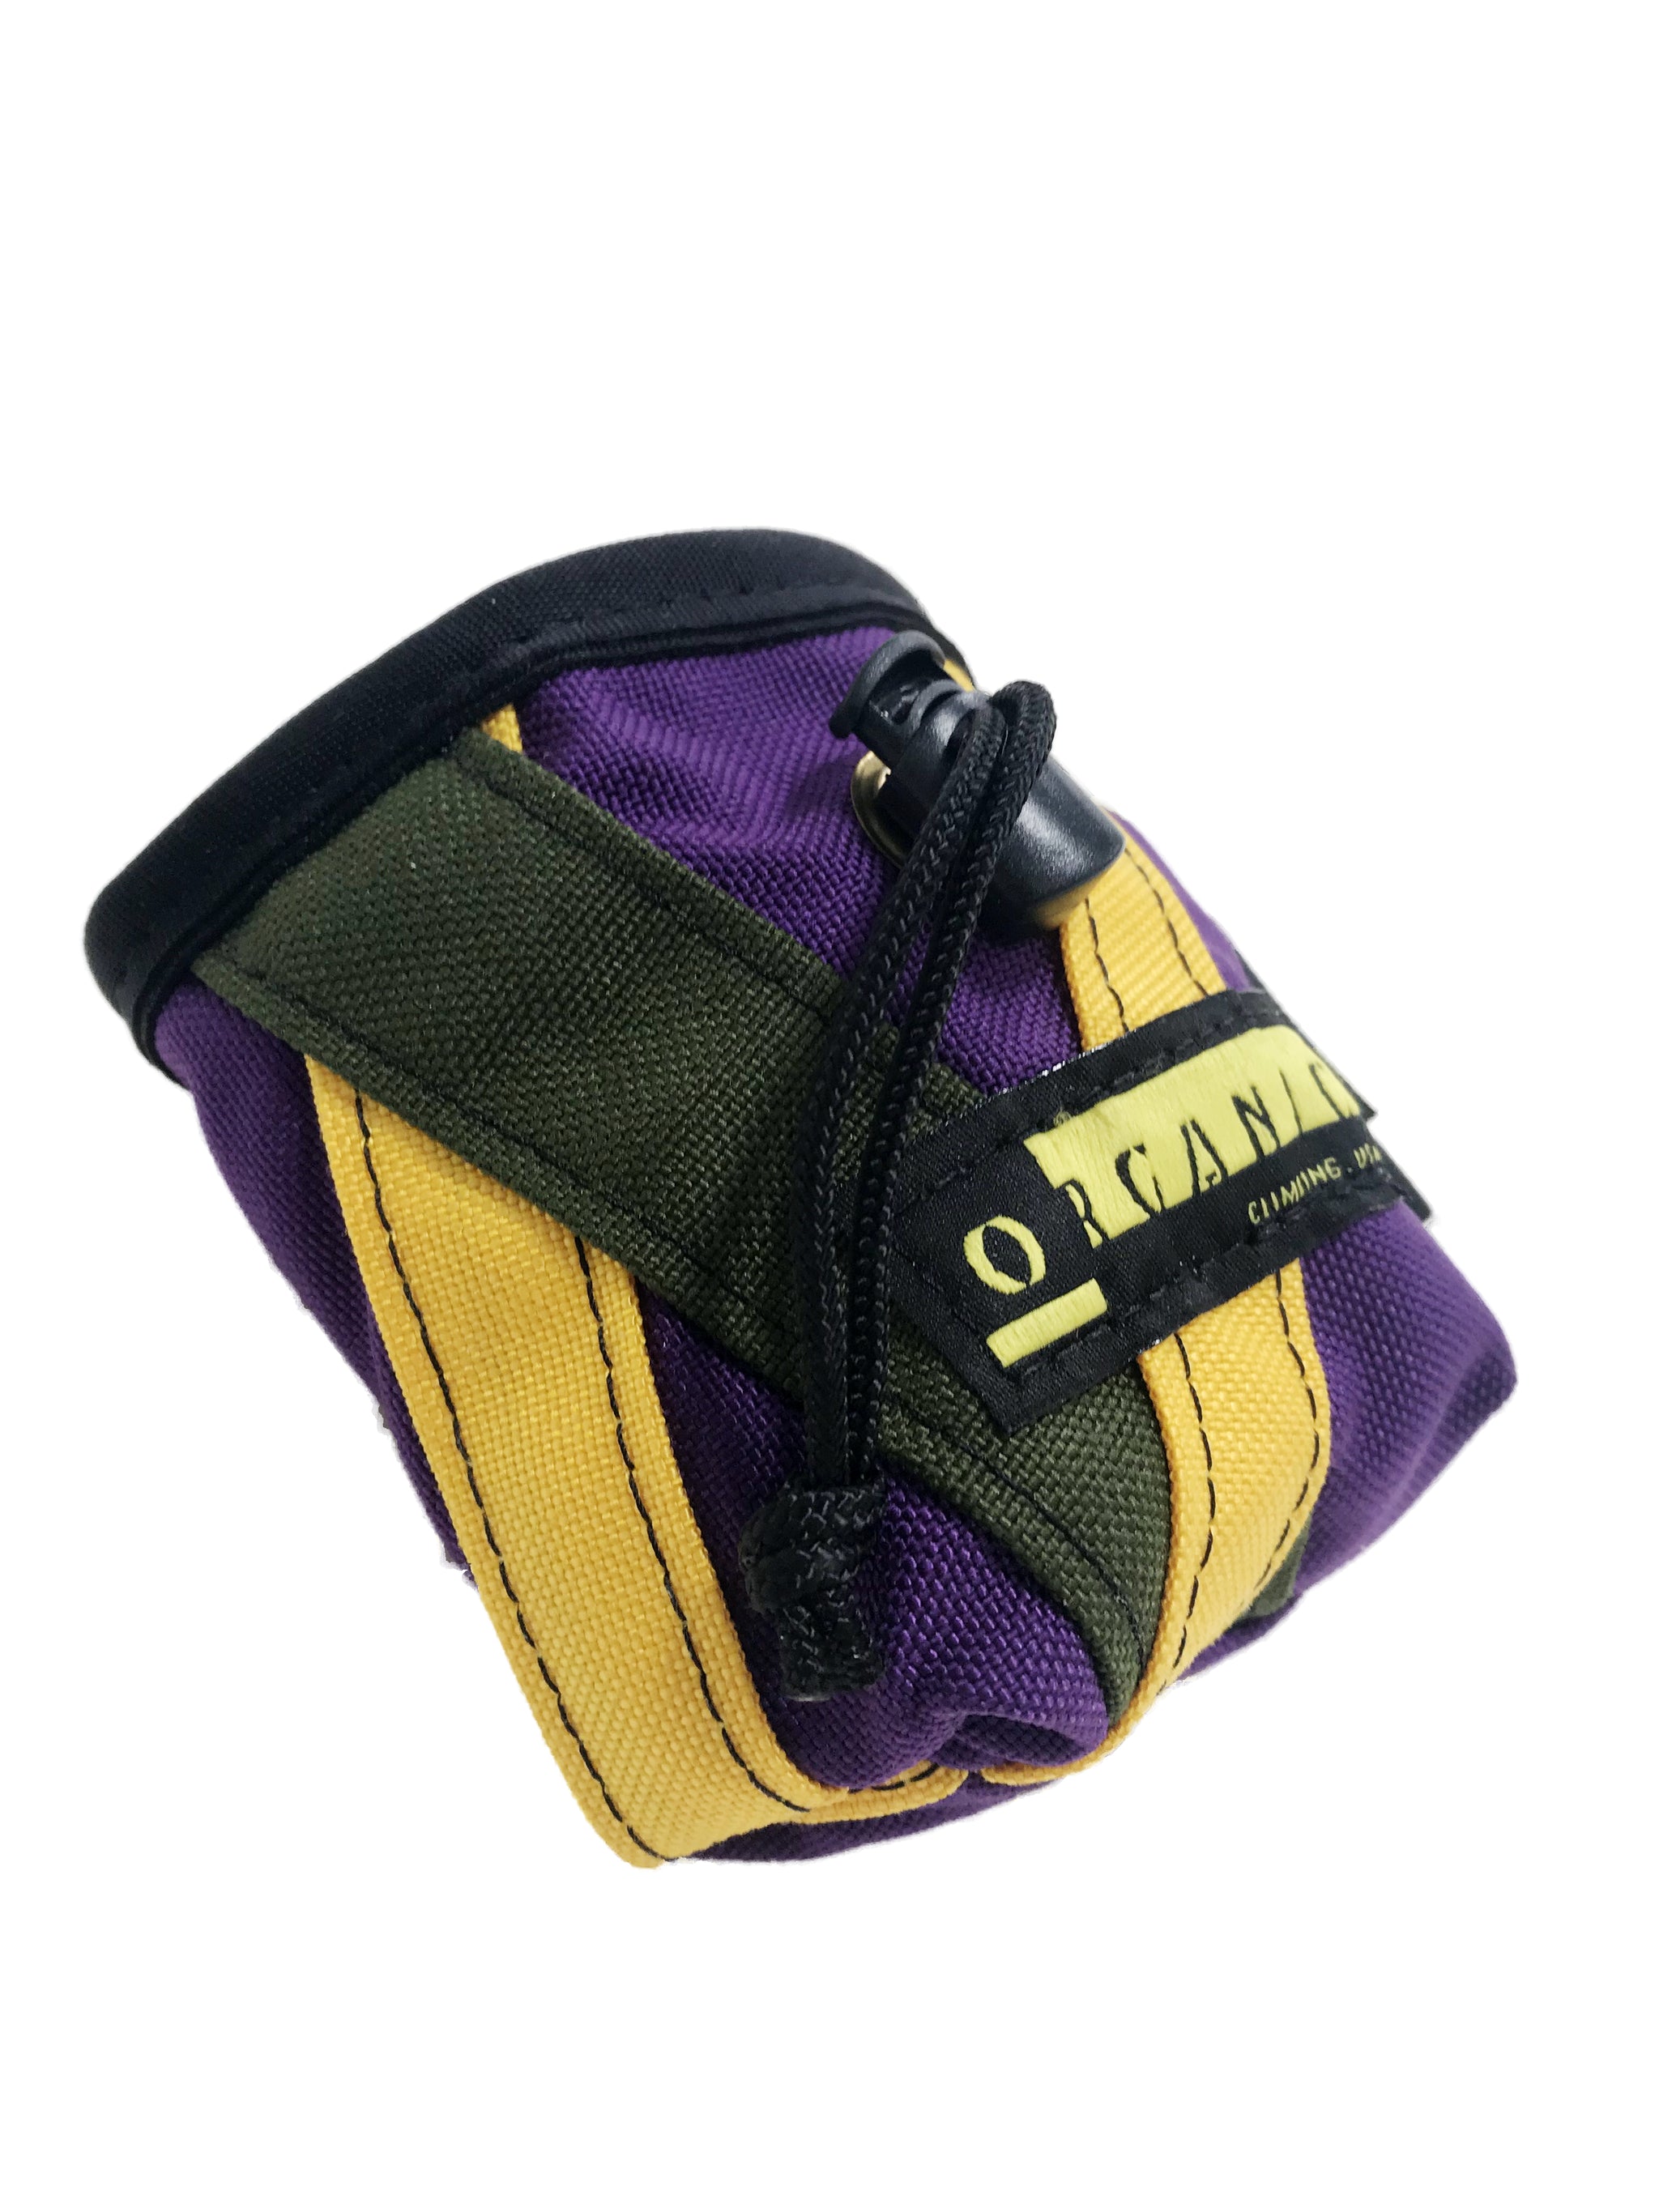 Climbing Chalk Bag, Climbing Chalk Bag, Chalk Bag Storage Pouch For Rock  Climbing Gym Weight-lifting With Drawstring And Adjustable Waist Belt |  Fruugo NL